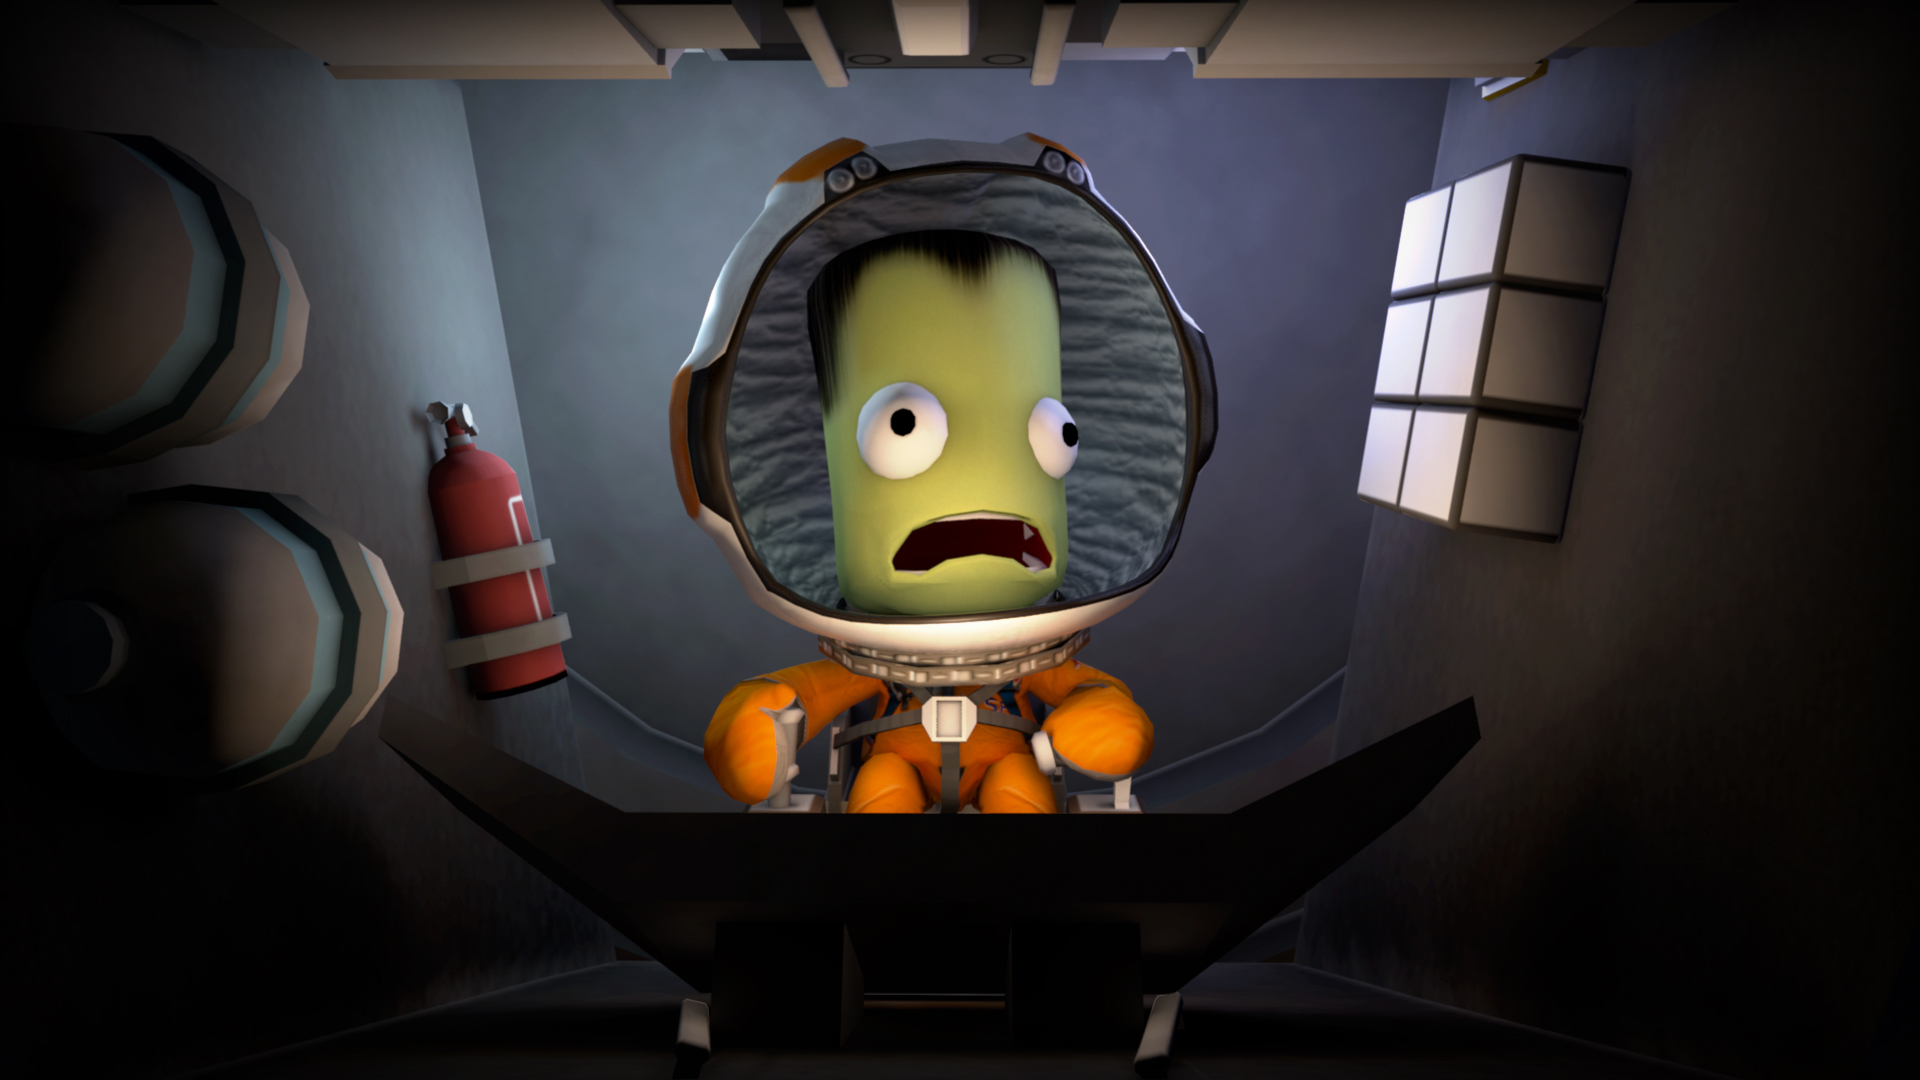 It Took Four Years, But Kerbal Space Program is Finally Done.